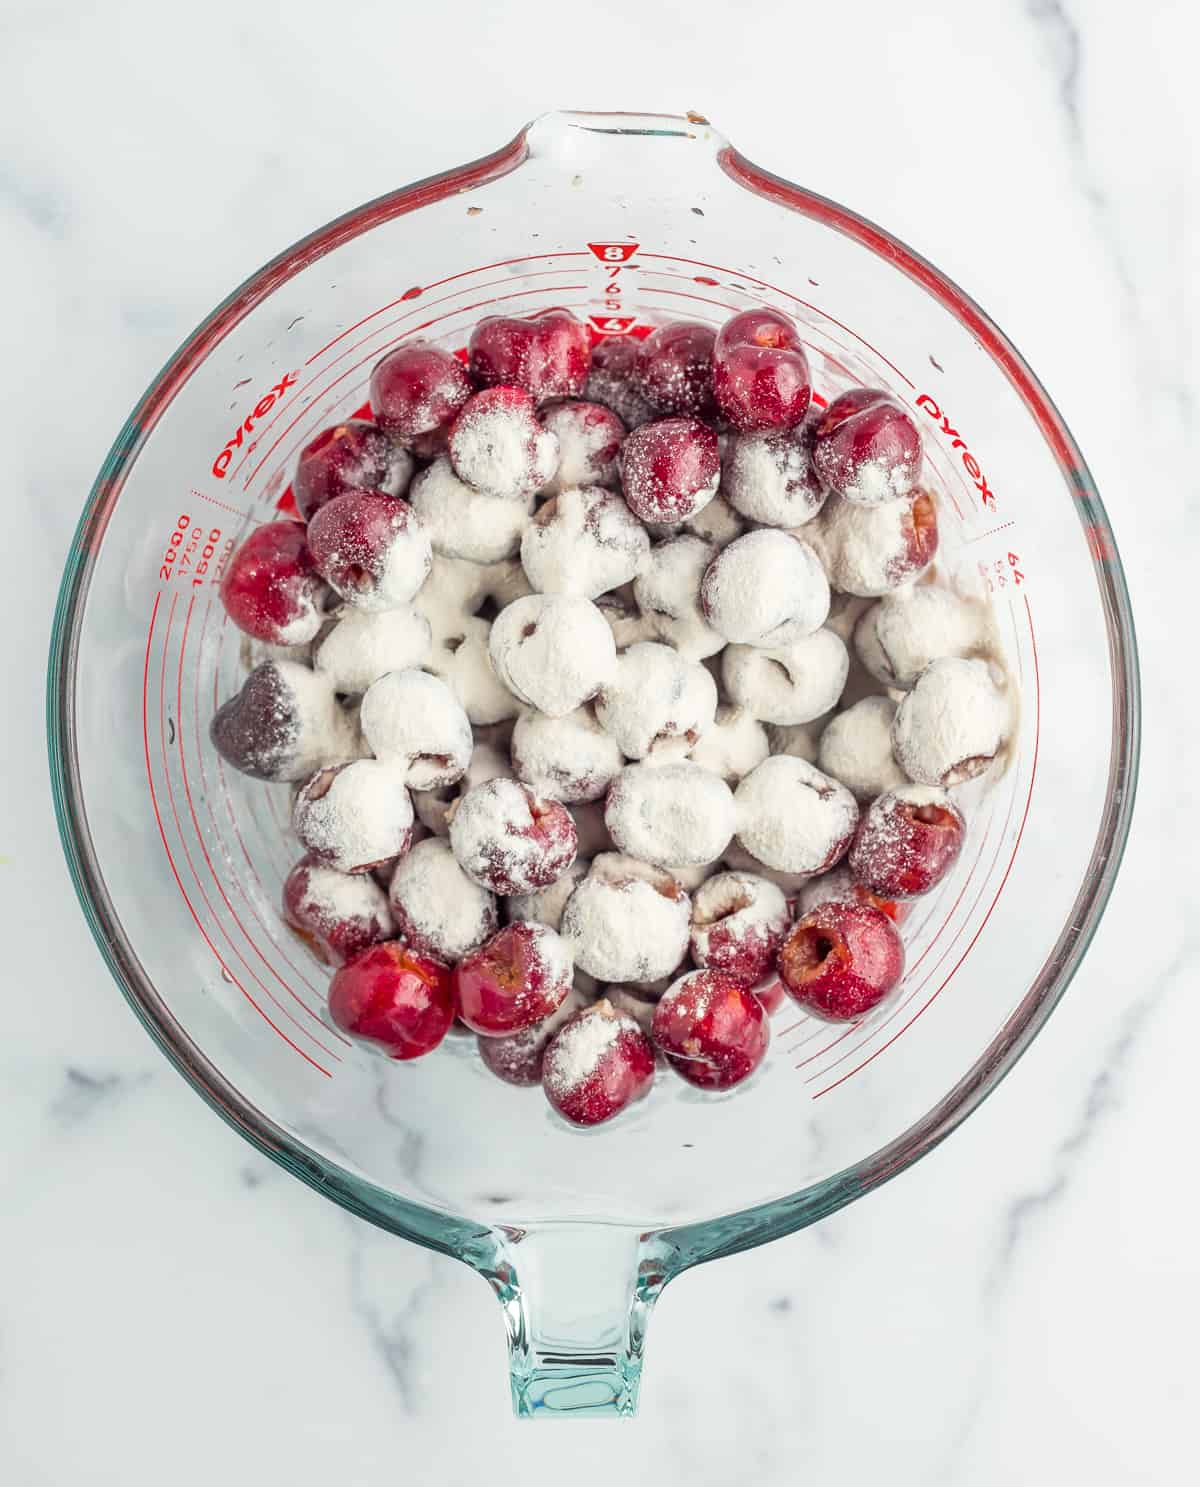 cherries with cornstarch in a bowl.